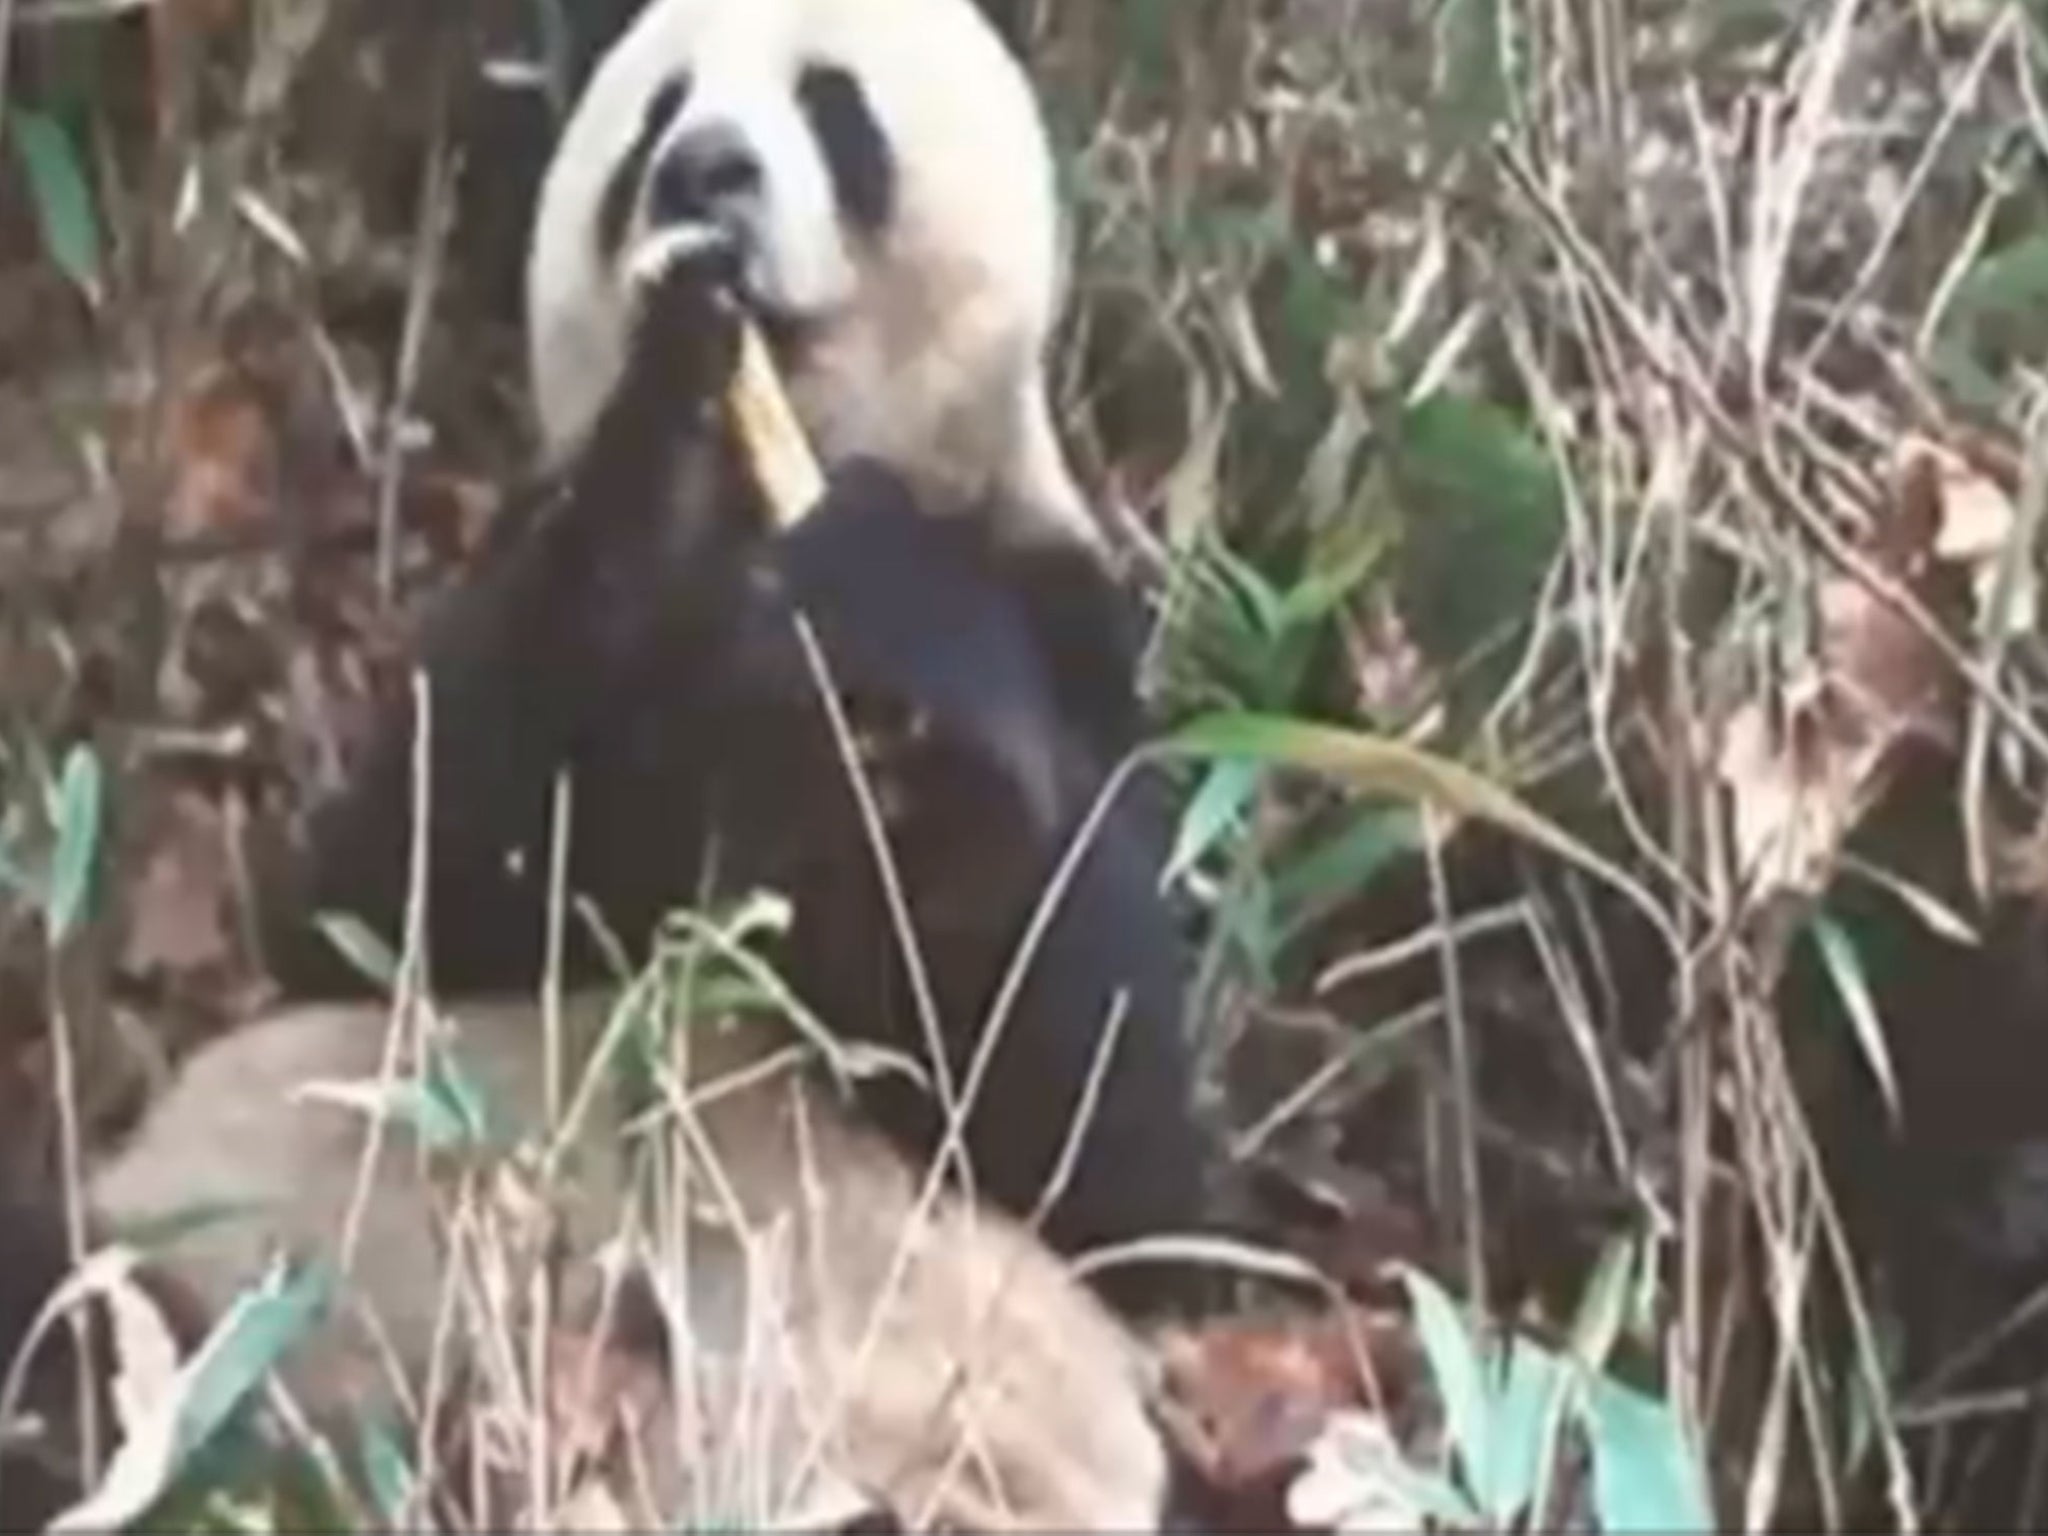 Watch a panda gnaw on takin bones for the first time.